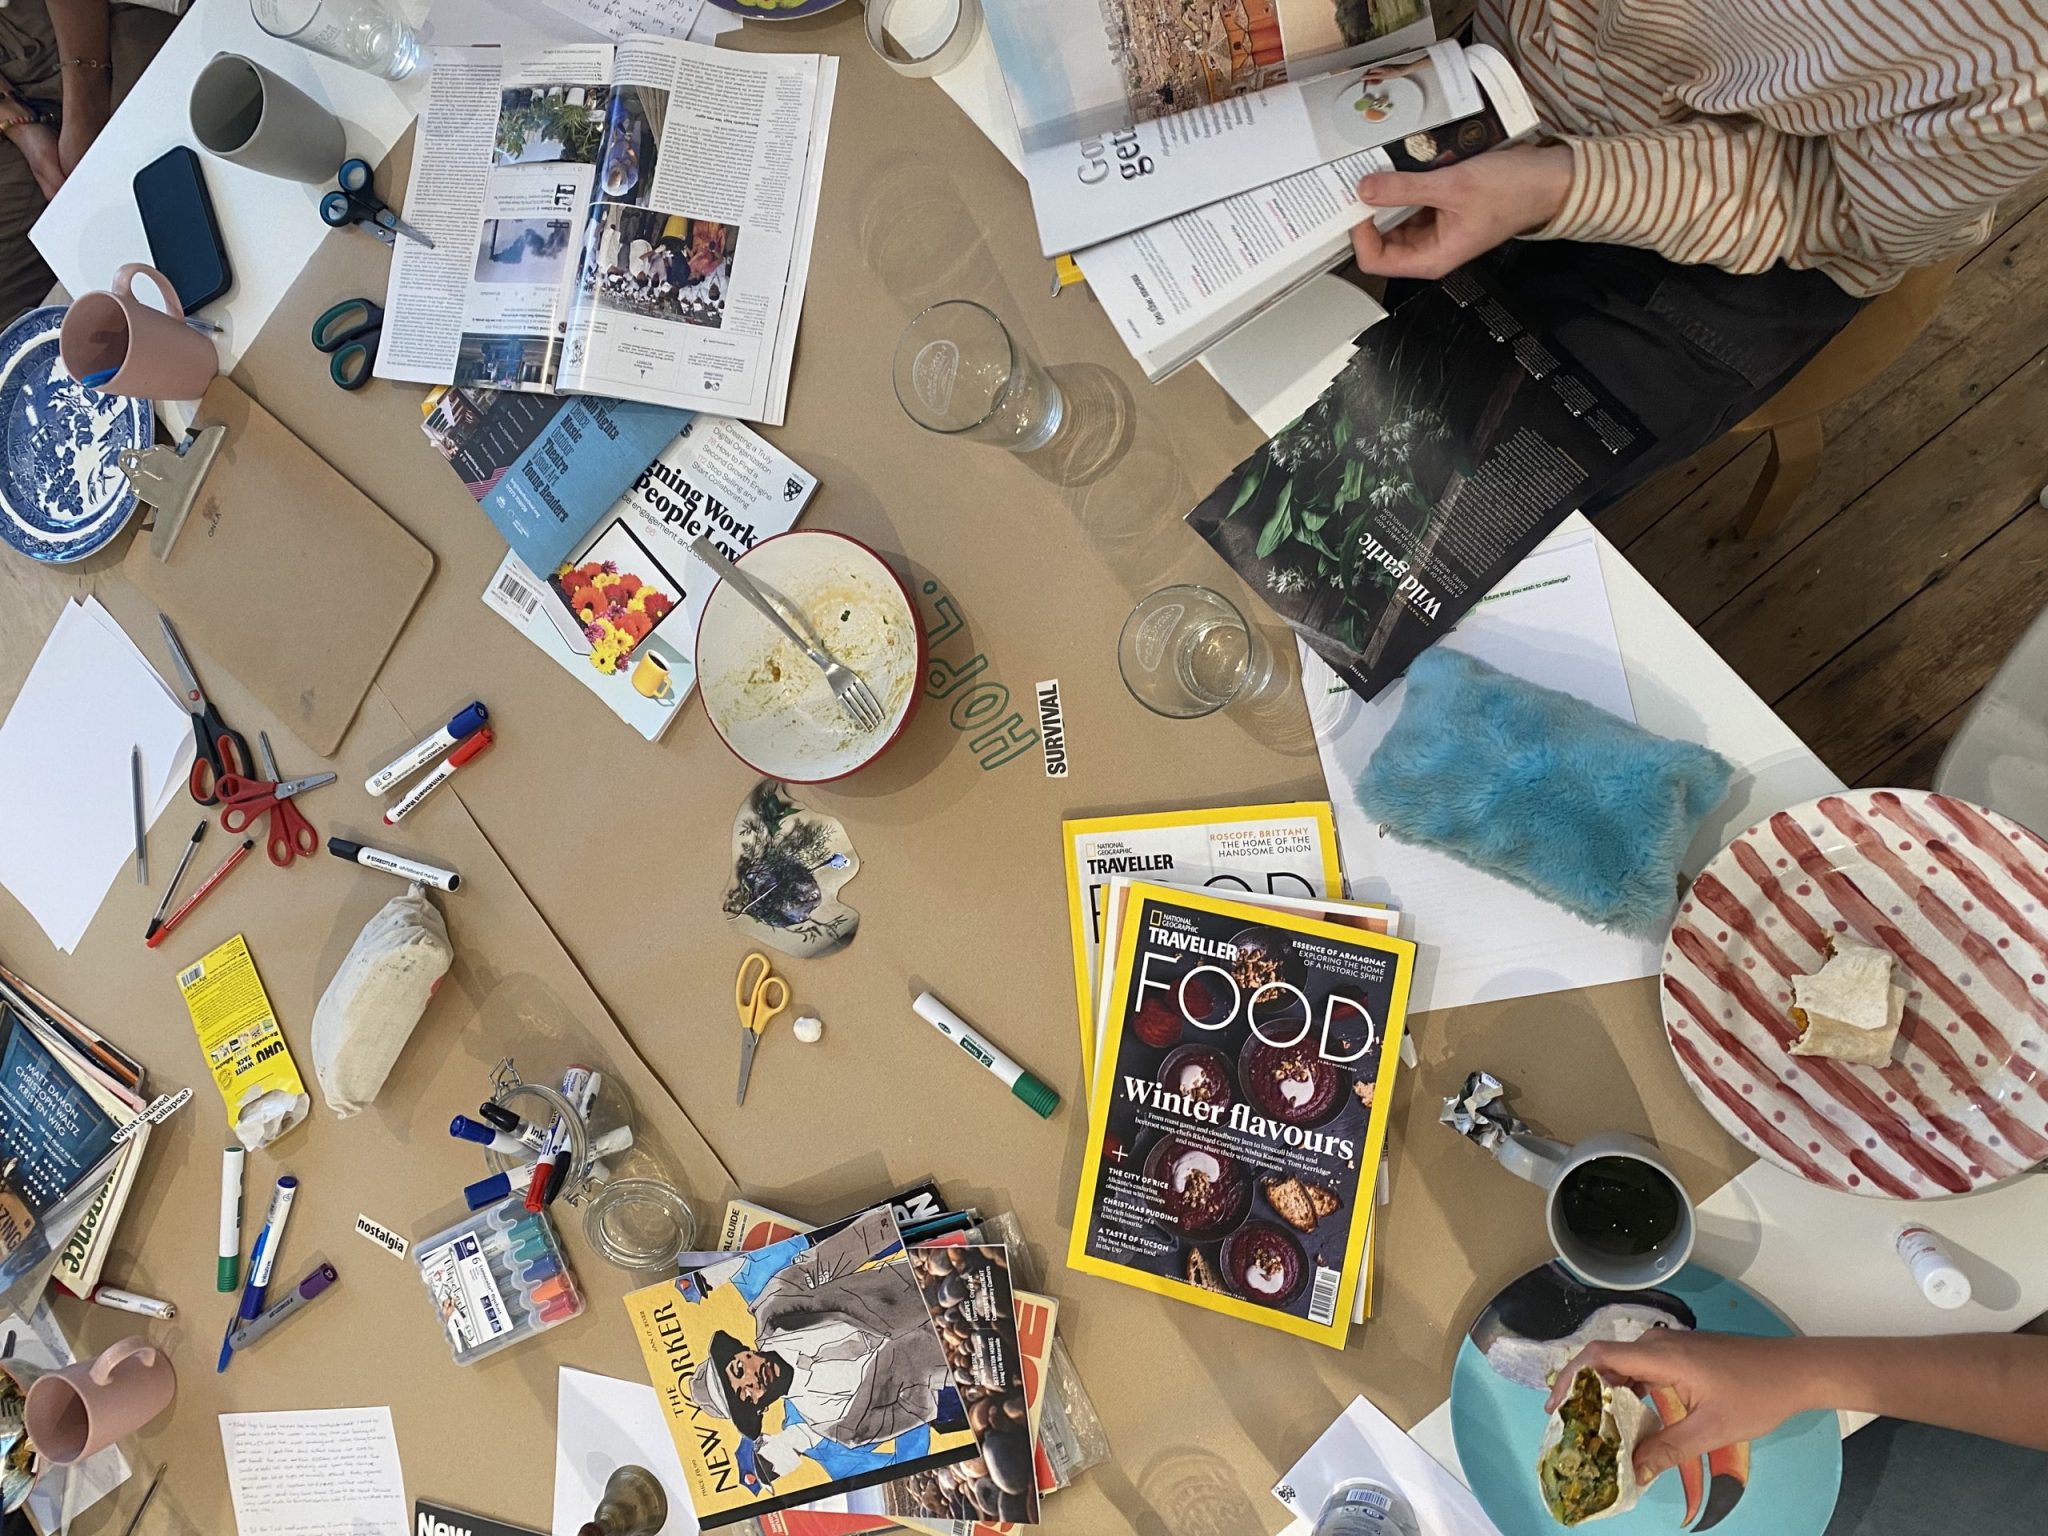 A photograph of people making collages and eating food.